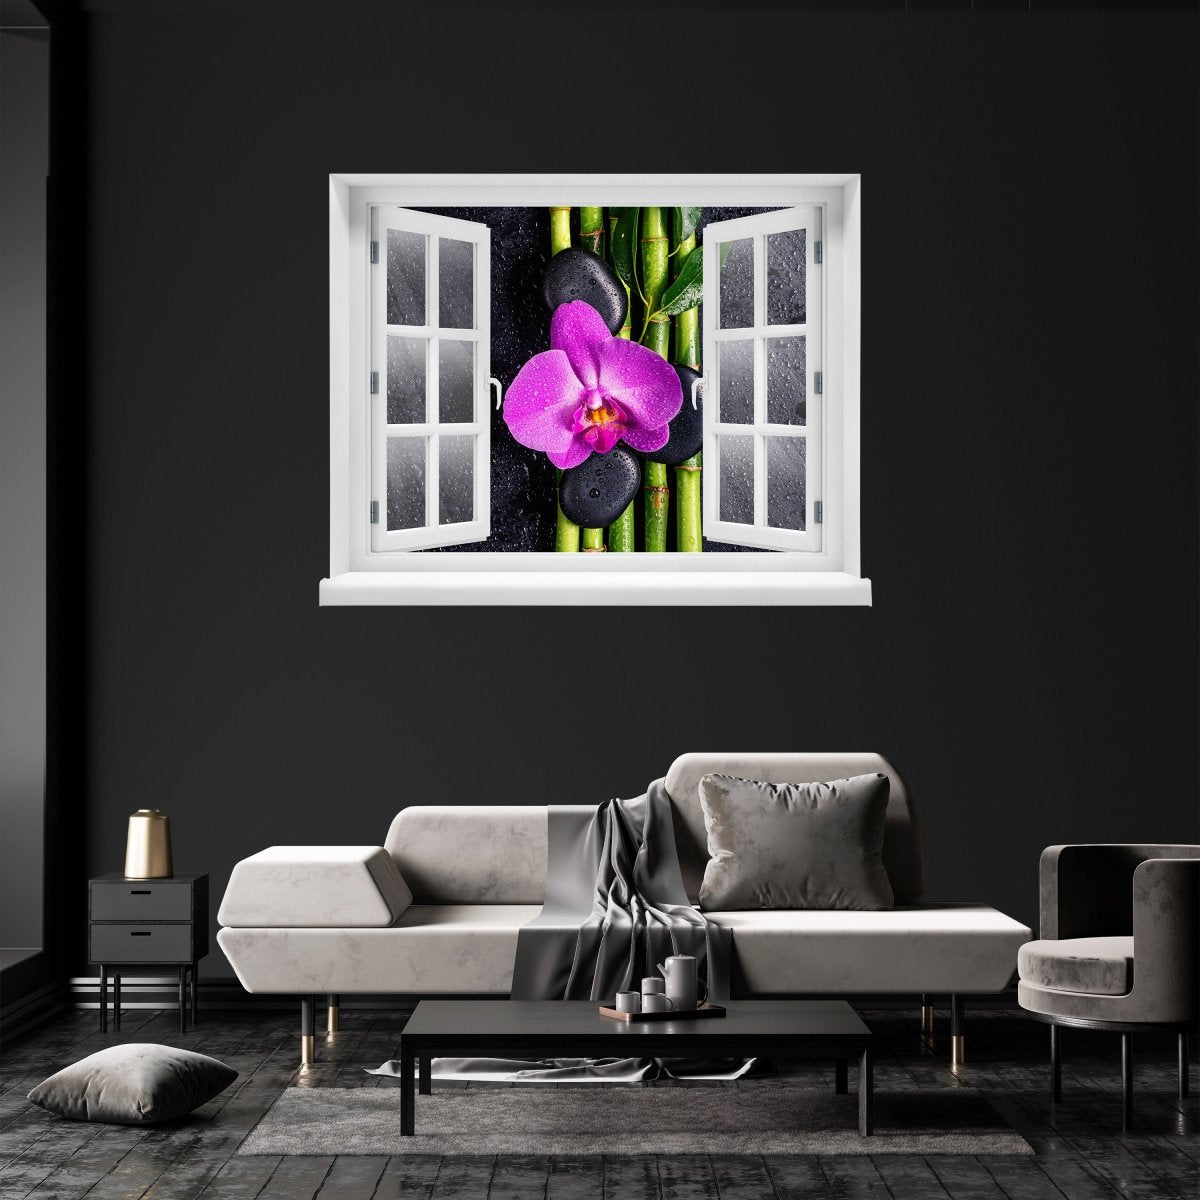 3D wall sticker basalt stones, bamboo &amp; orchid, spa - Wall Decal M1296